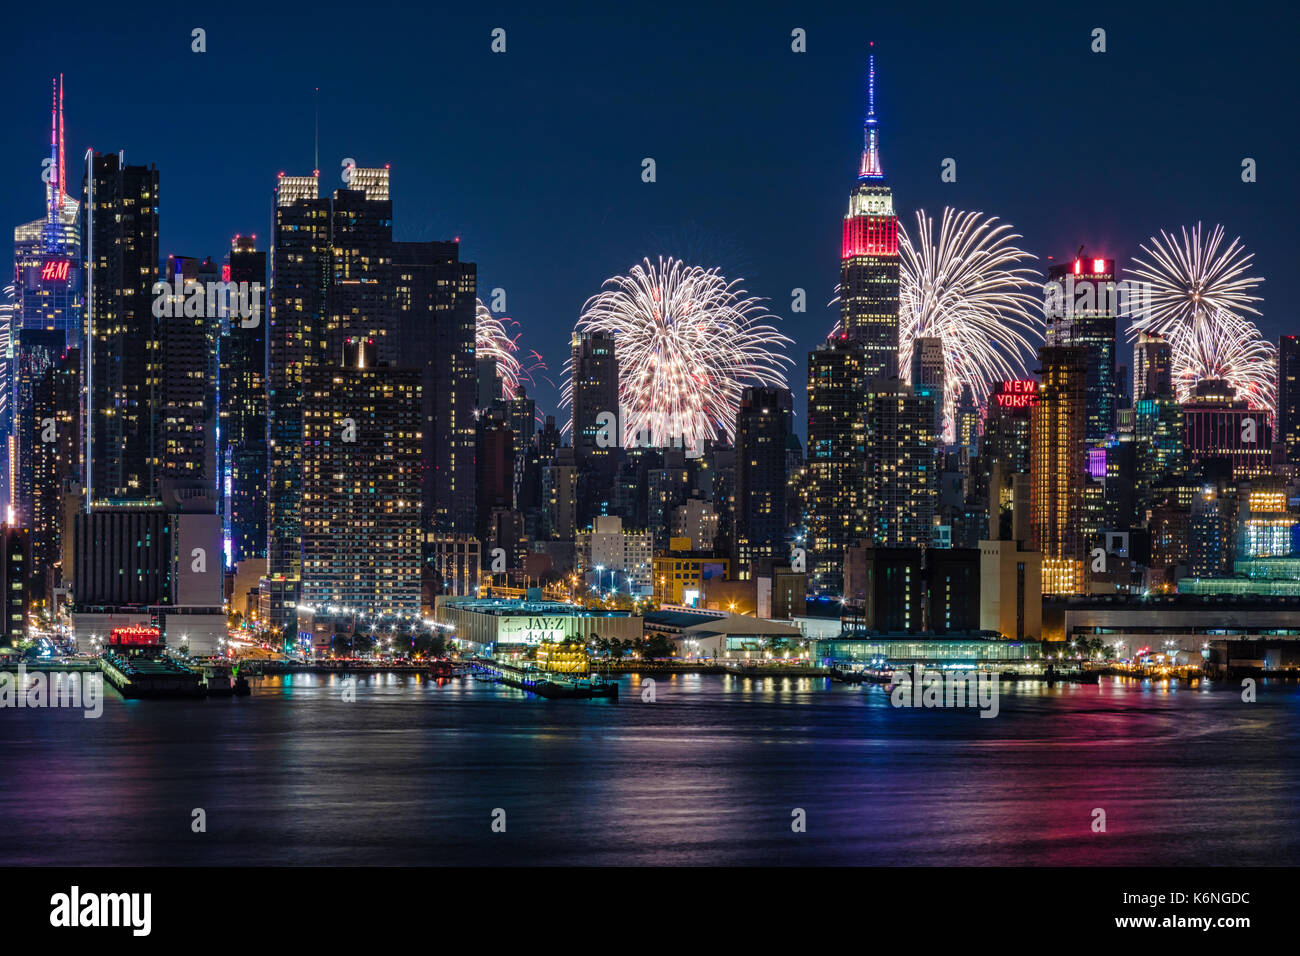 NYC 4th Of July Fireworks Celebration -  New York City skyline with the Macy's Spectacular 4th of July Fireworks Celebration Show as a backdrop to midtown Manhattan. Stock Photo